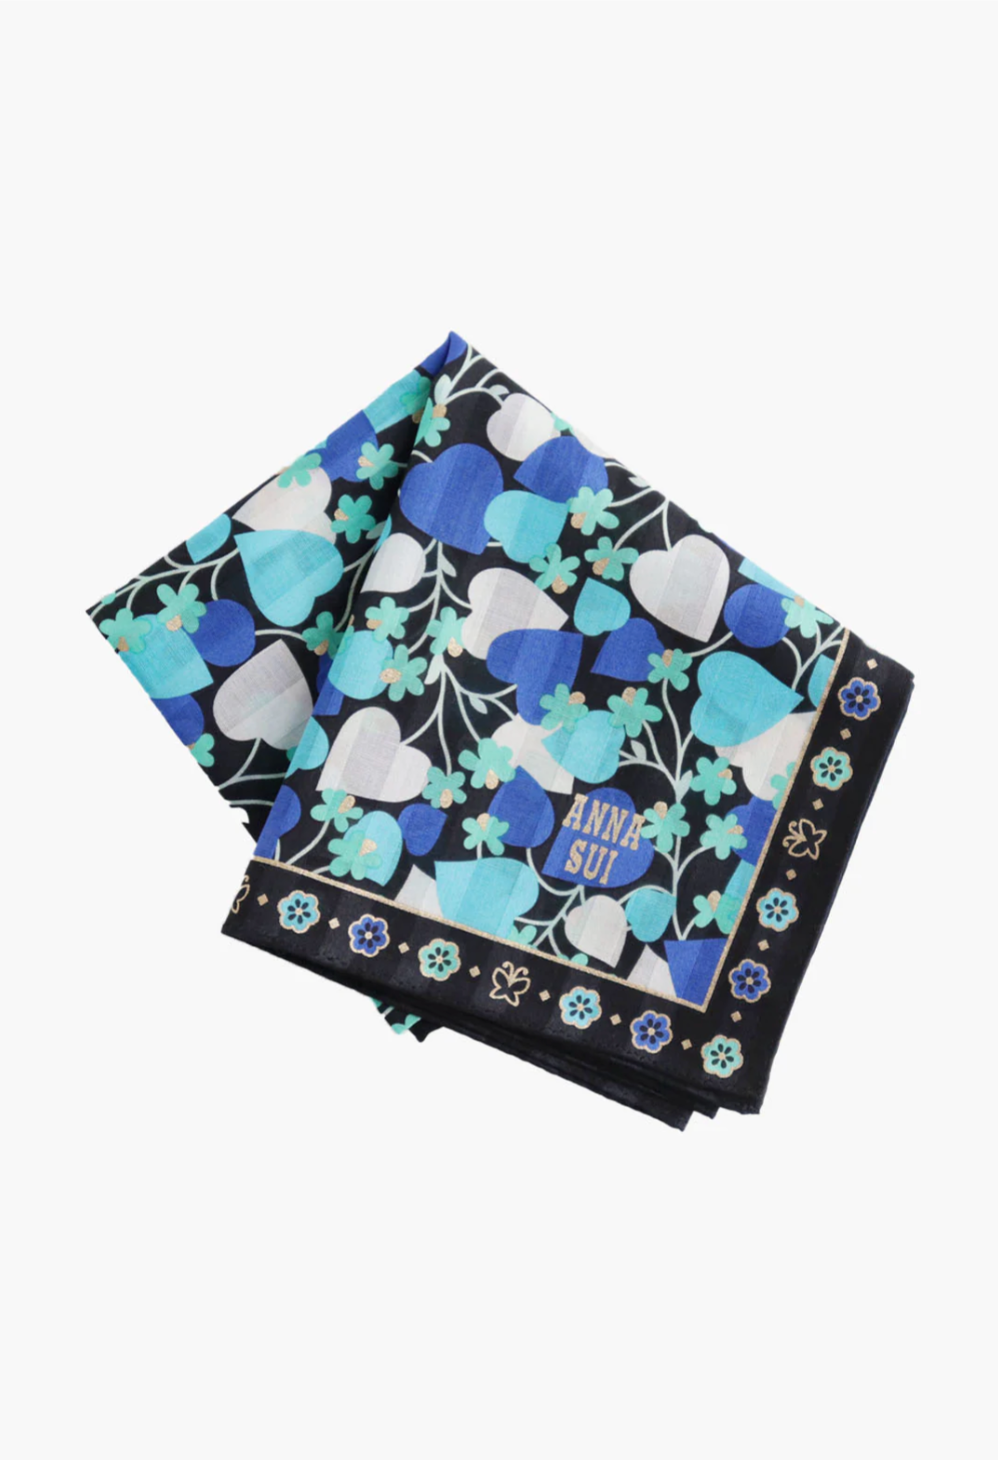 Blooming Hearts Handkerchief, Anna Sui label, blooming stylized hearts in hue of blue, black border